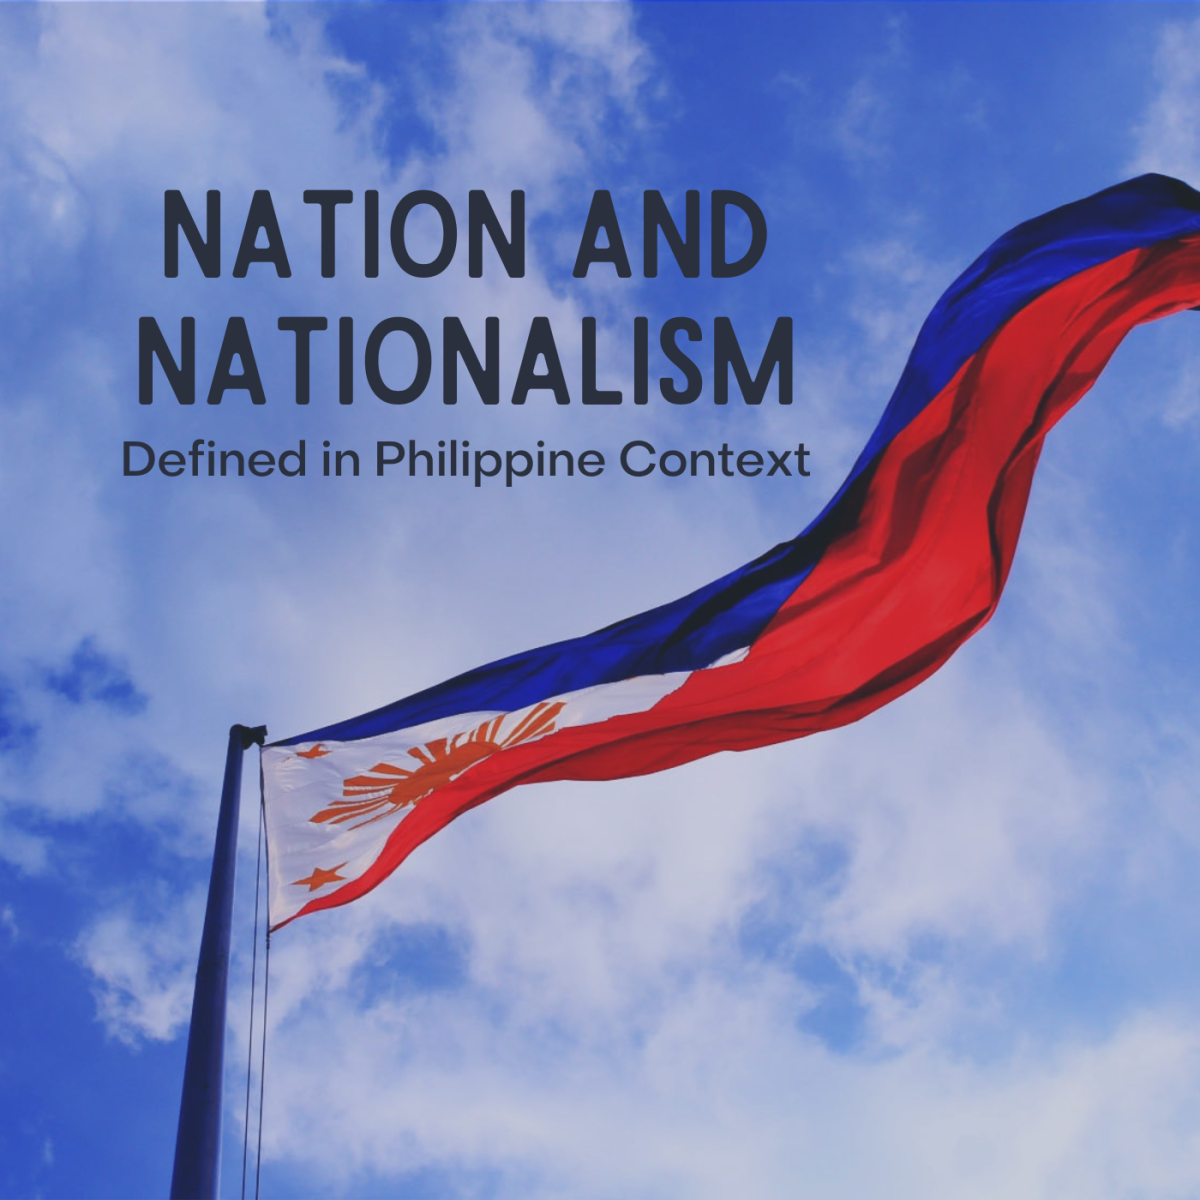 Nation and Nationalism Defined in Philippine Context